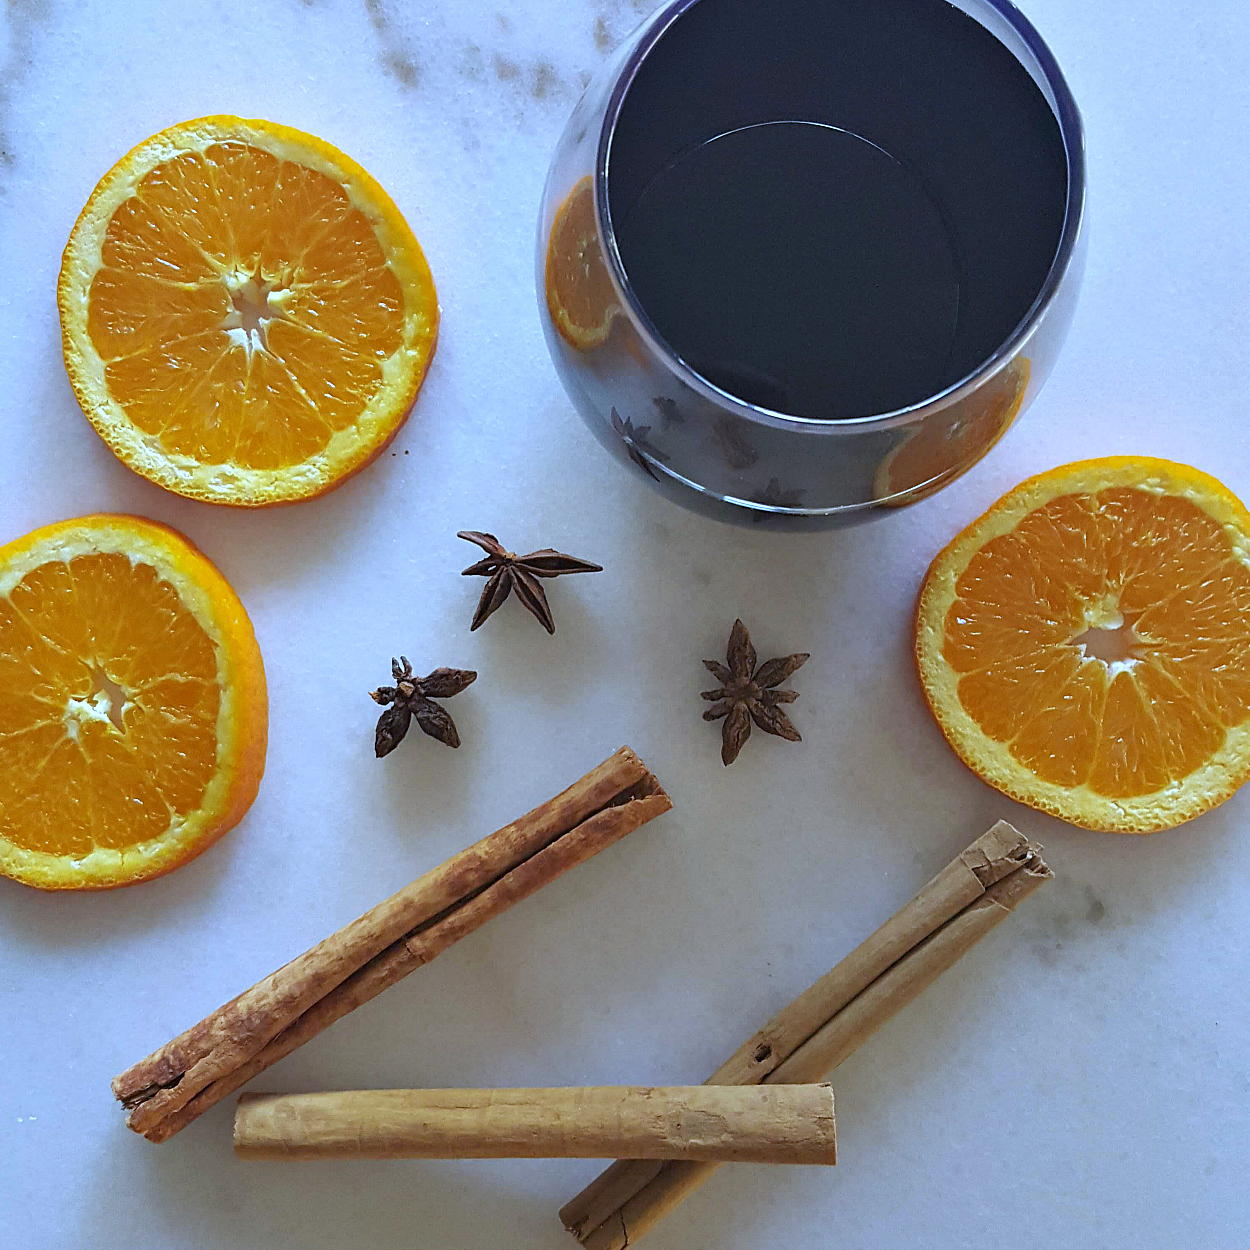  mulled wine